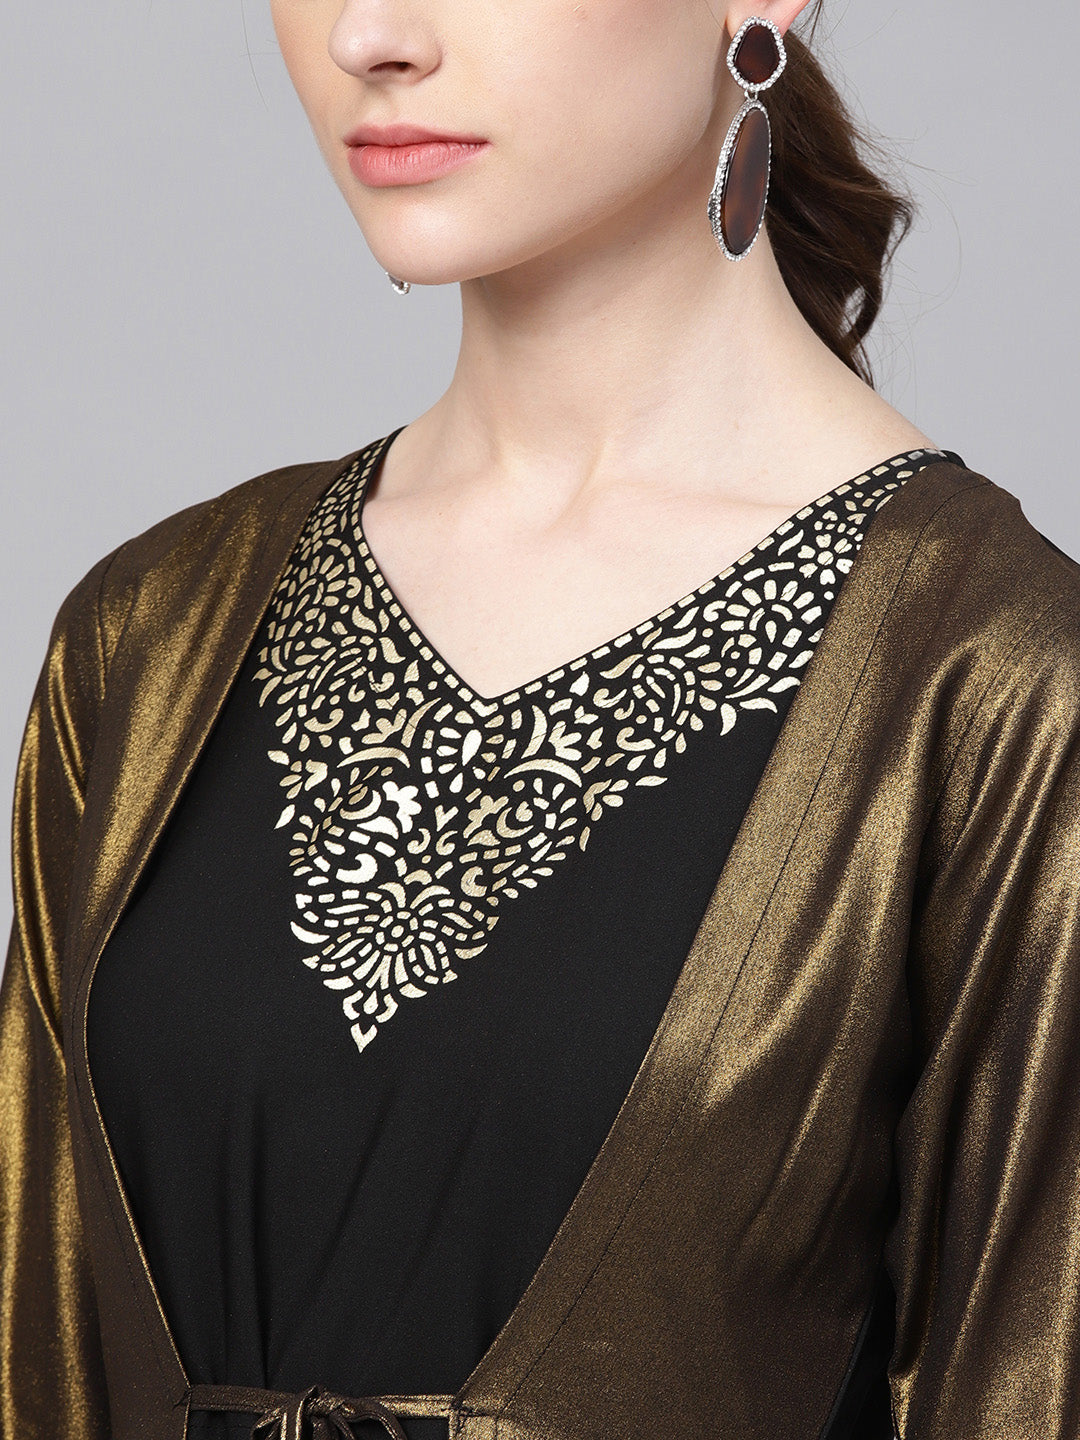 Women's Black Crepe Dress With Attached Jacket - Ahalyaa